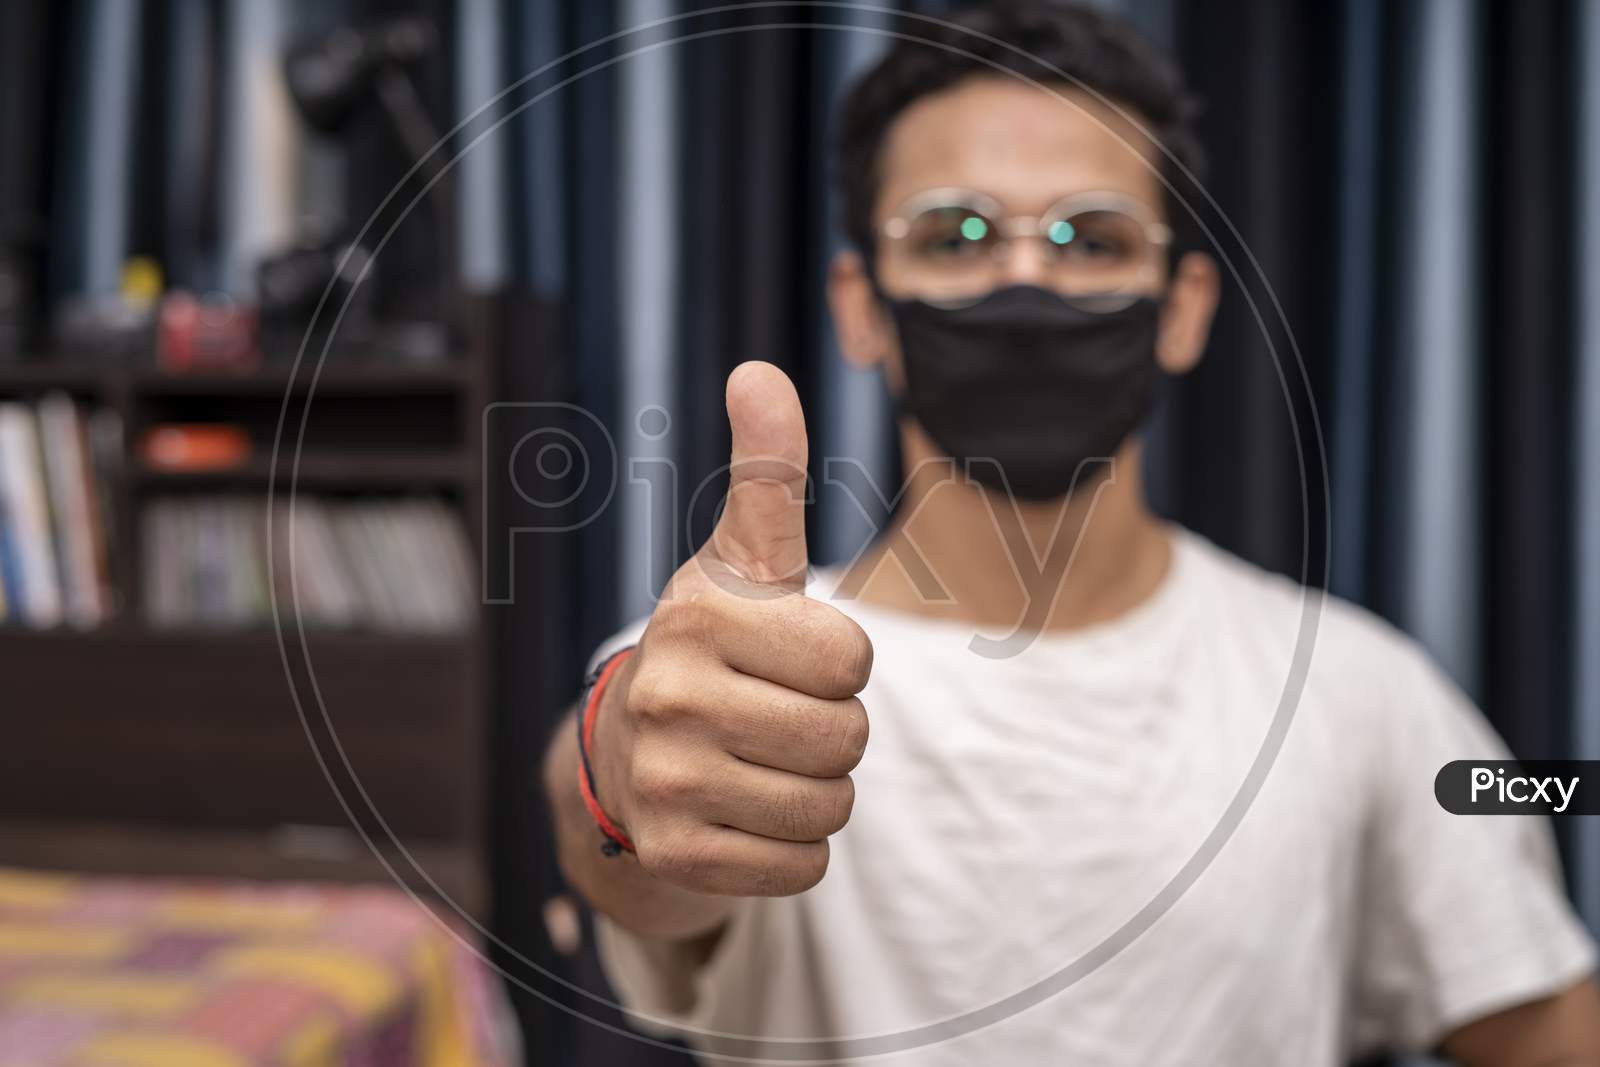 Young Indian Boy Wearing Glasses And A Black Mask Showing Thumbs Up